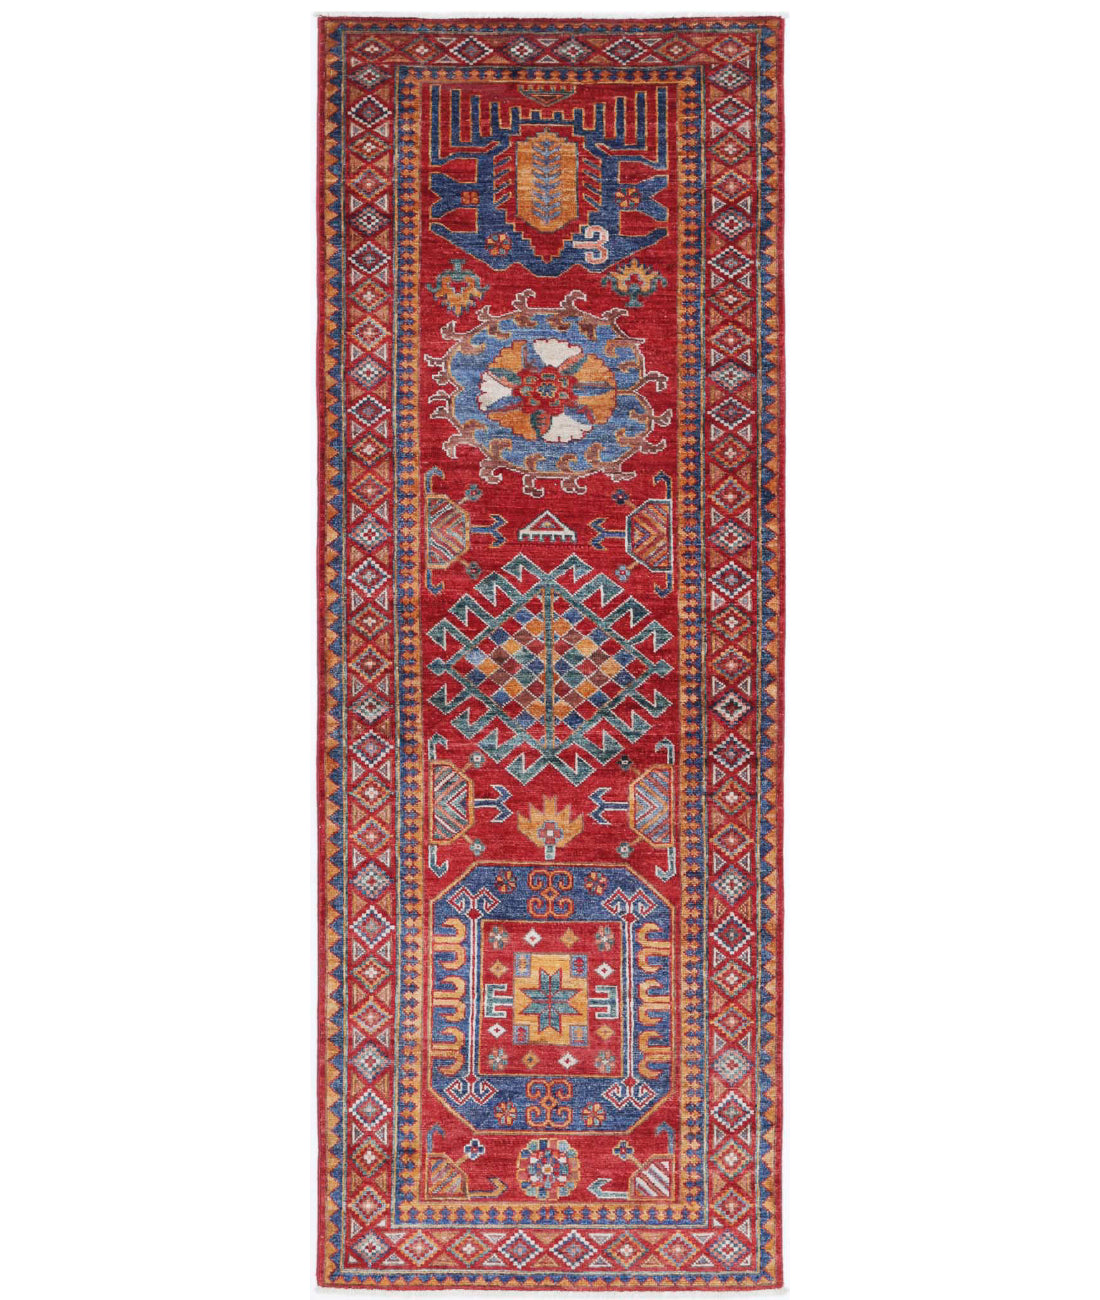 Hand Knotted Nomadic Caucasian Humna Wool Rug - 2&#39;9&#39;&#39; x 8&#39;1&#39;&#39; 2&#39;9&#39;&#39; x 8&#39;1&#39;&#39; (83 X 243) / Red / Blue